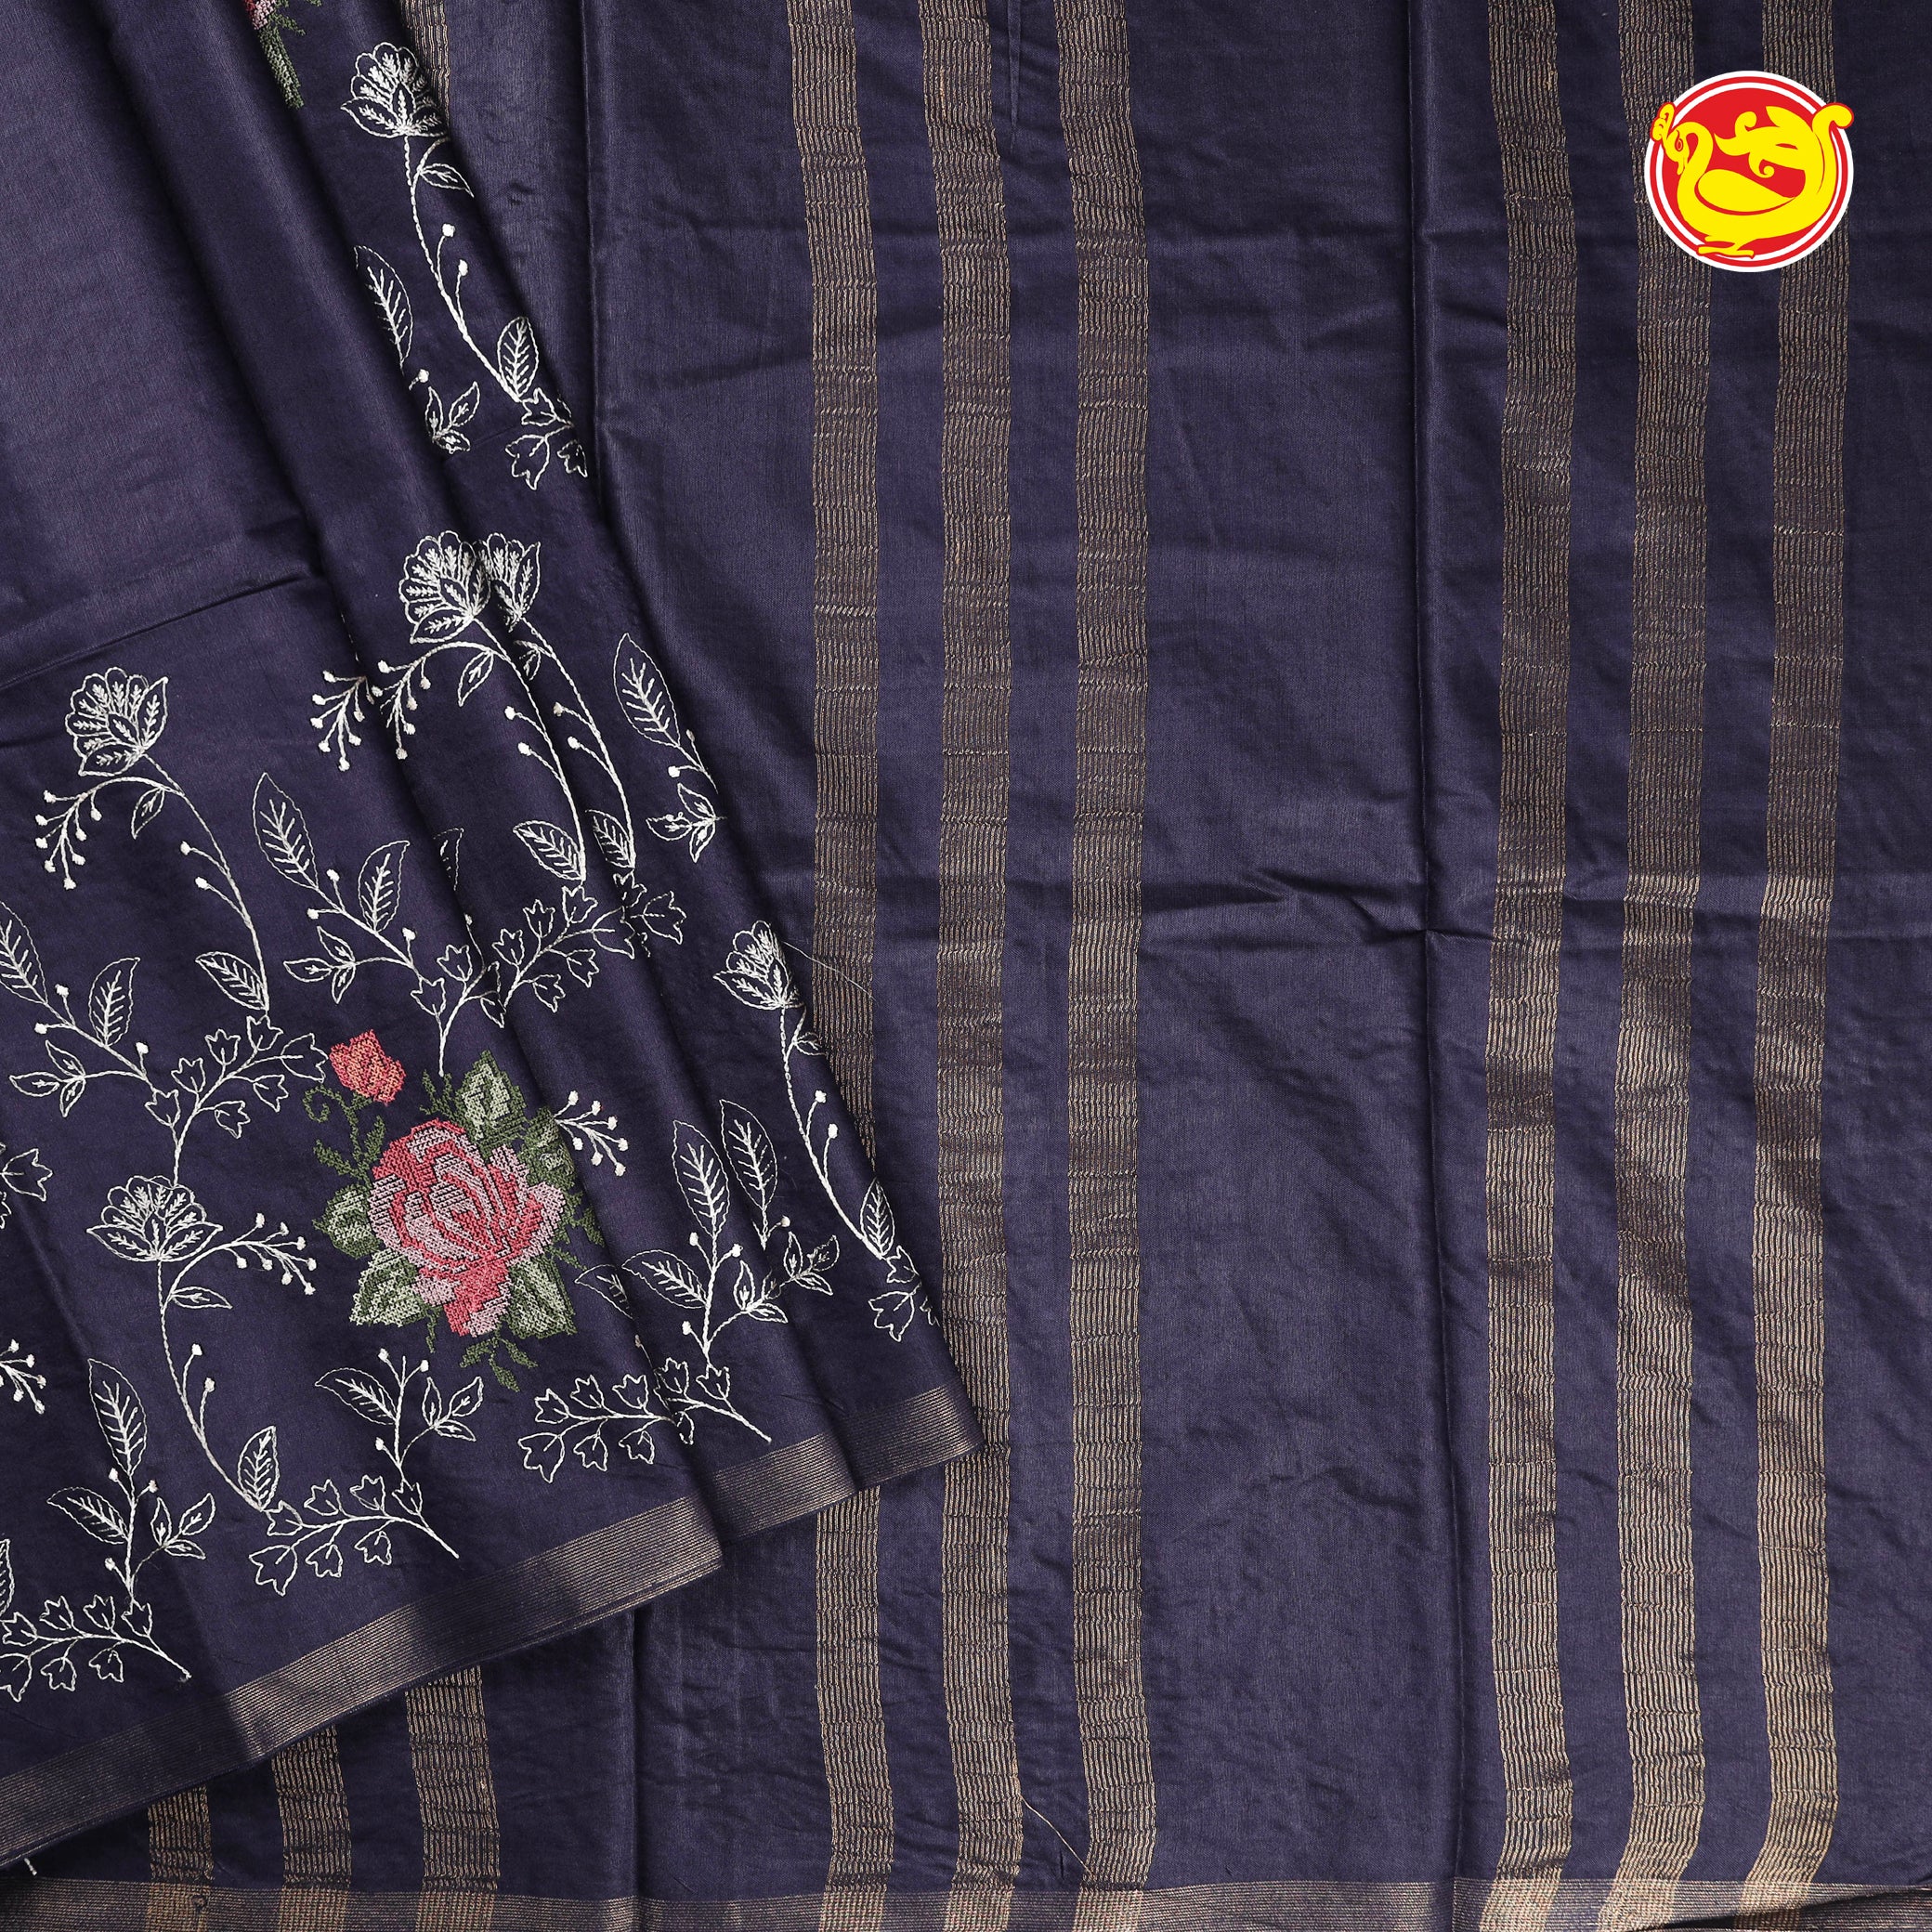 Charcoal grey art tussar saree with floral embroidery